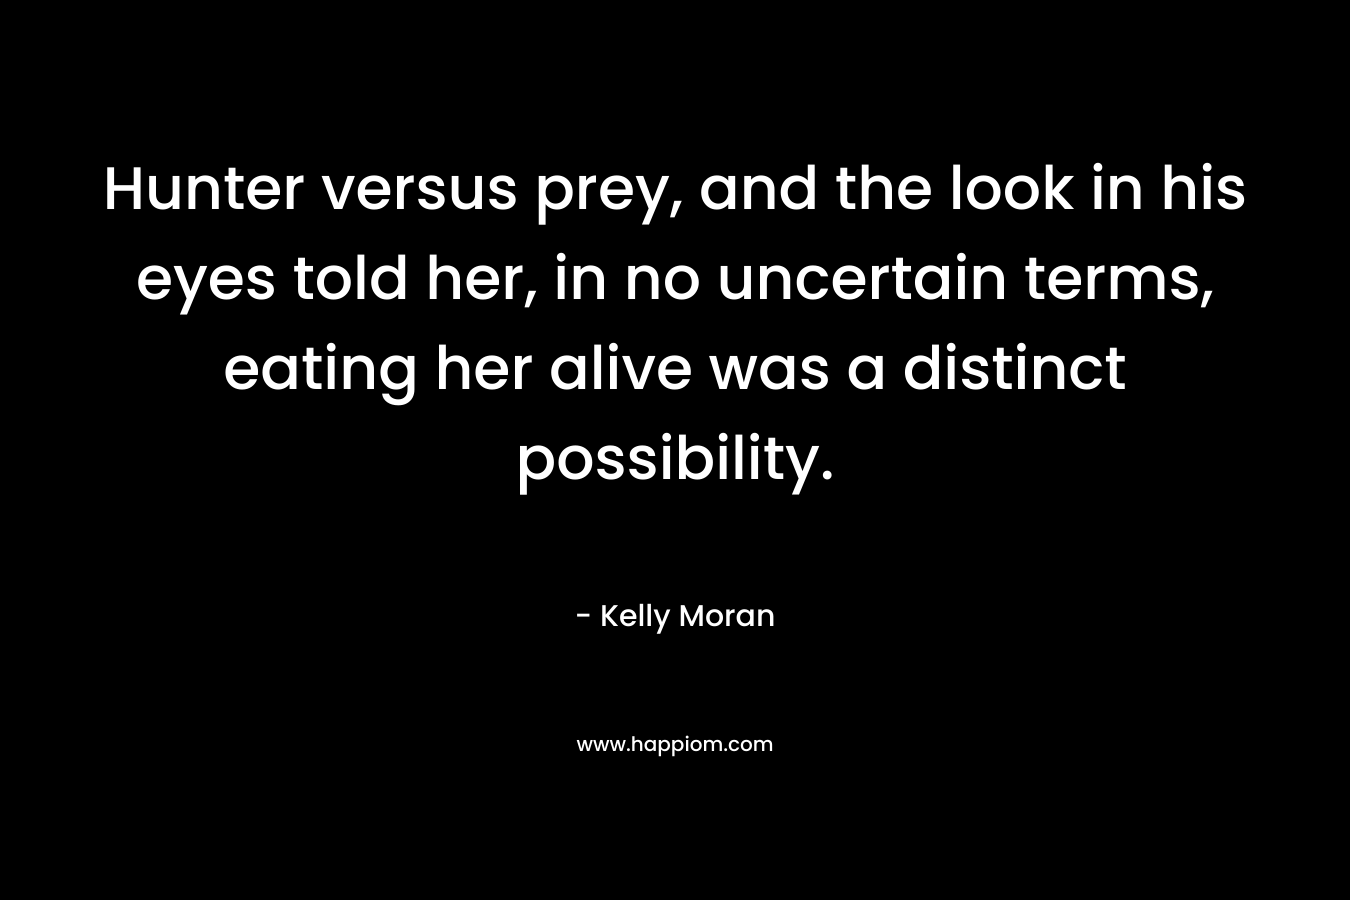 Hunter versus prey, and the look in his eyes told her, in no uncertain terms, eating her alive was a distinct possibility. – Kelly Moran